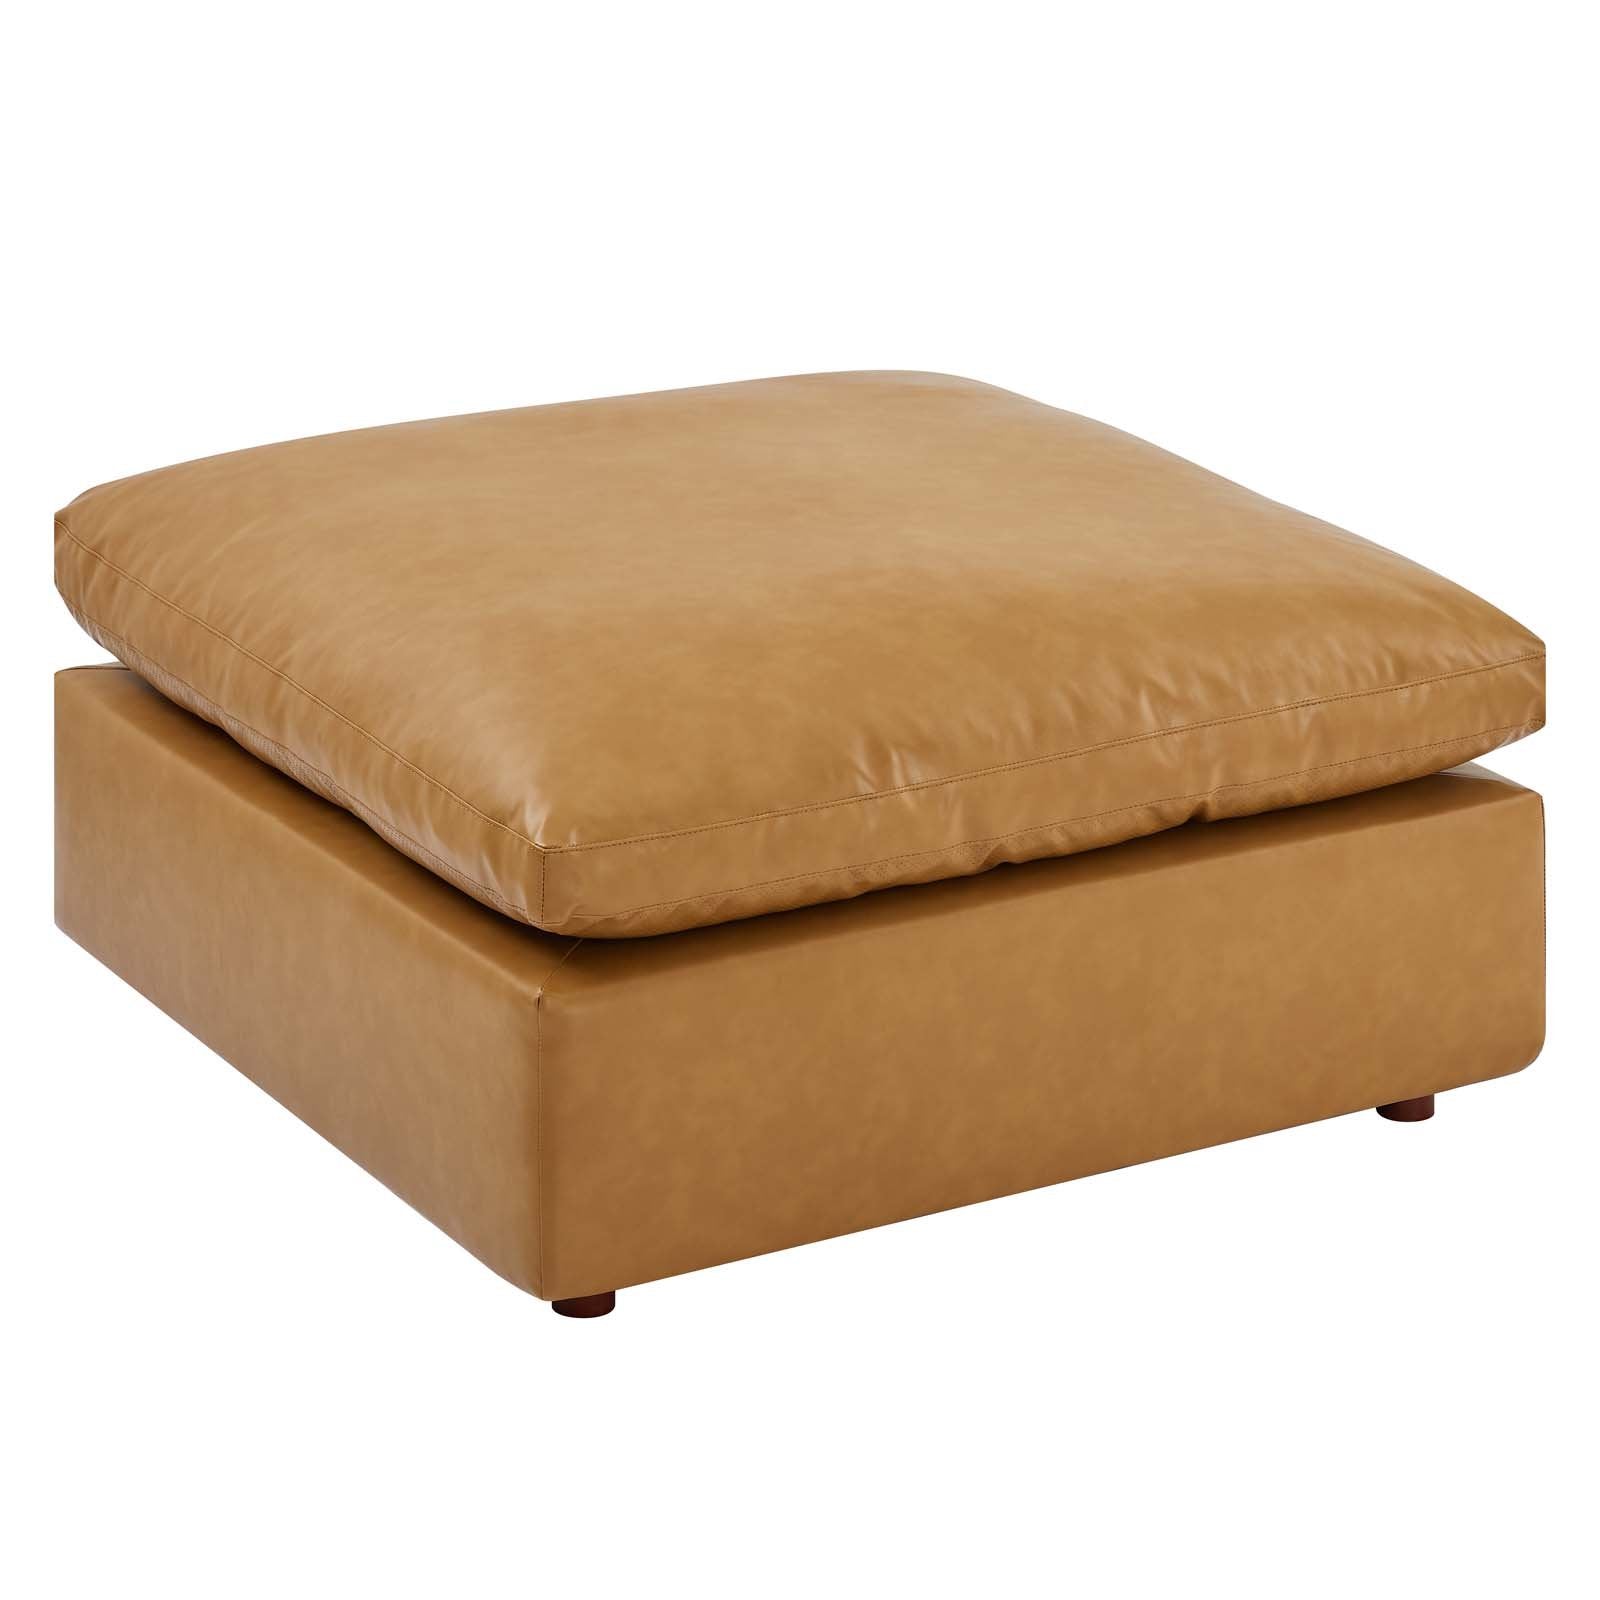 Commix Down Filled Overstuffed Vegan Leather Ottoman - East Shore Modern Home Furnishings